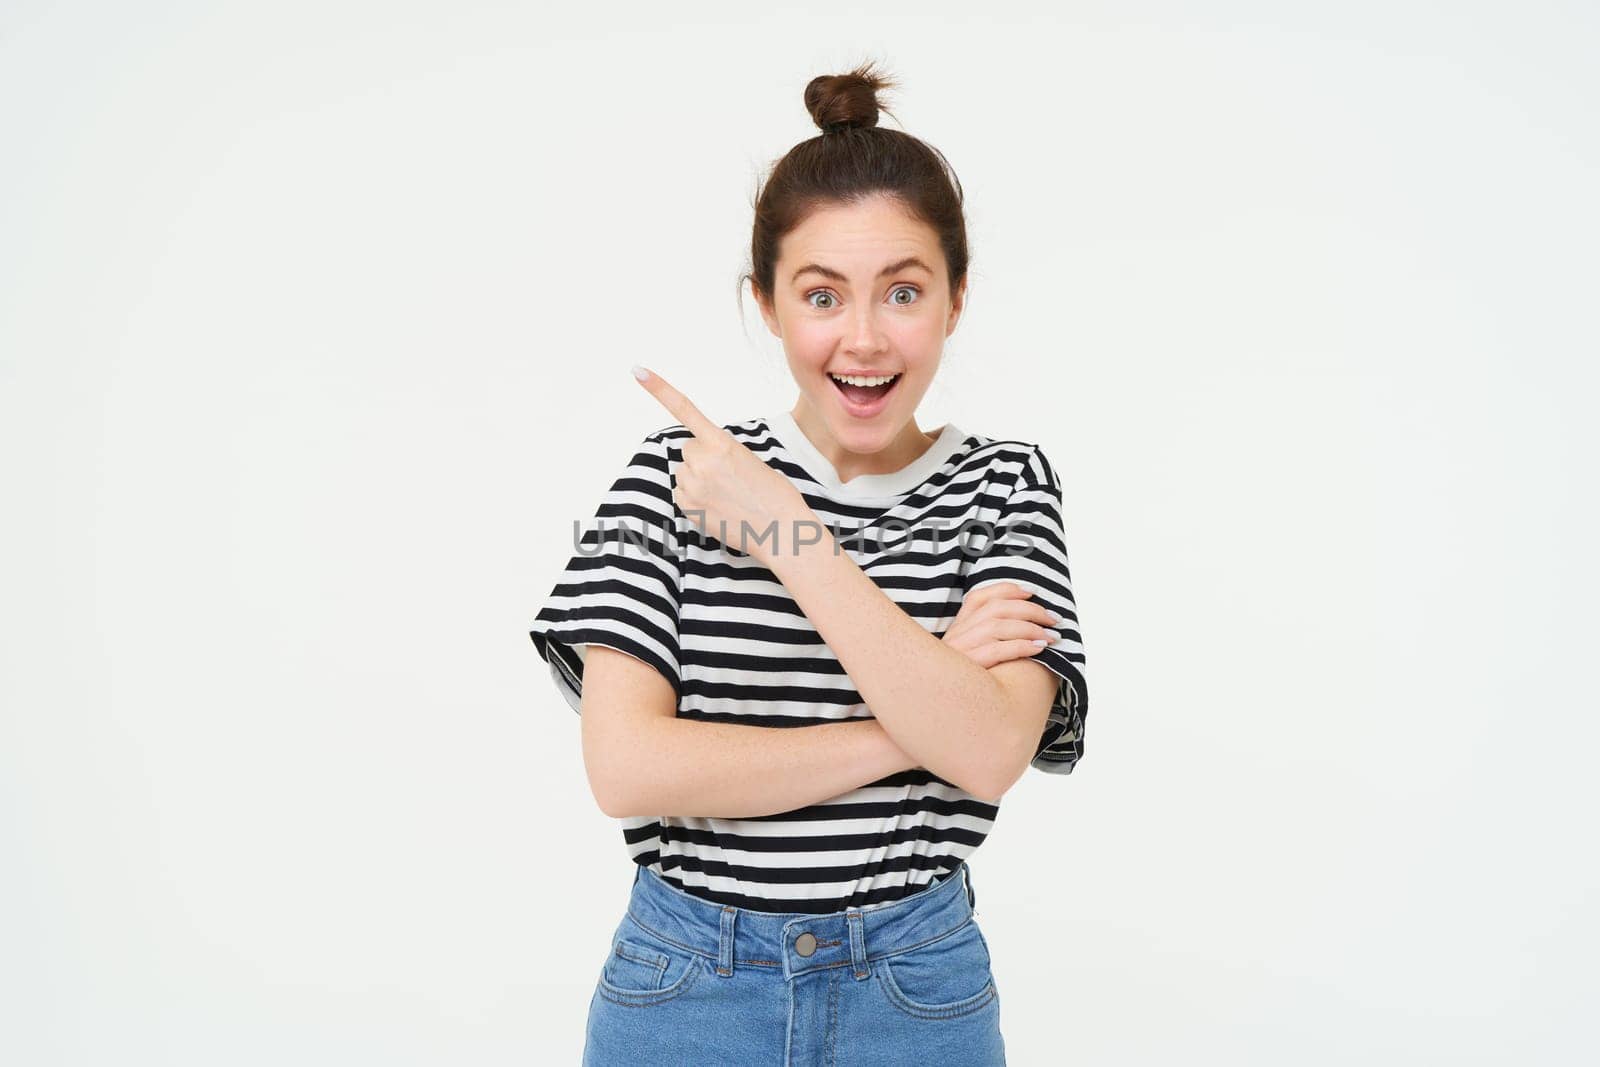 Image of excited young woman, smiling, showing amazing price discounts, pointing left, demonstrating something awesome, standing over white background.